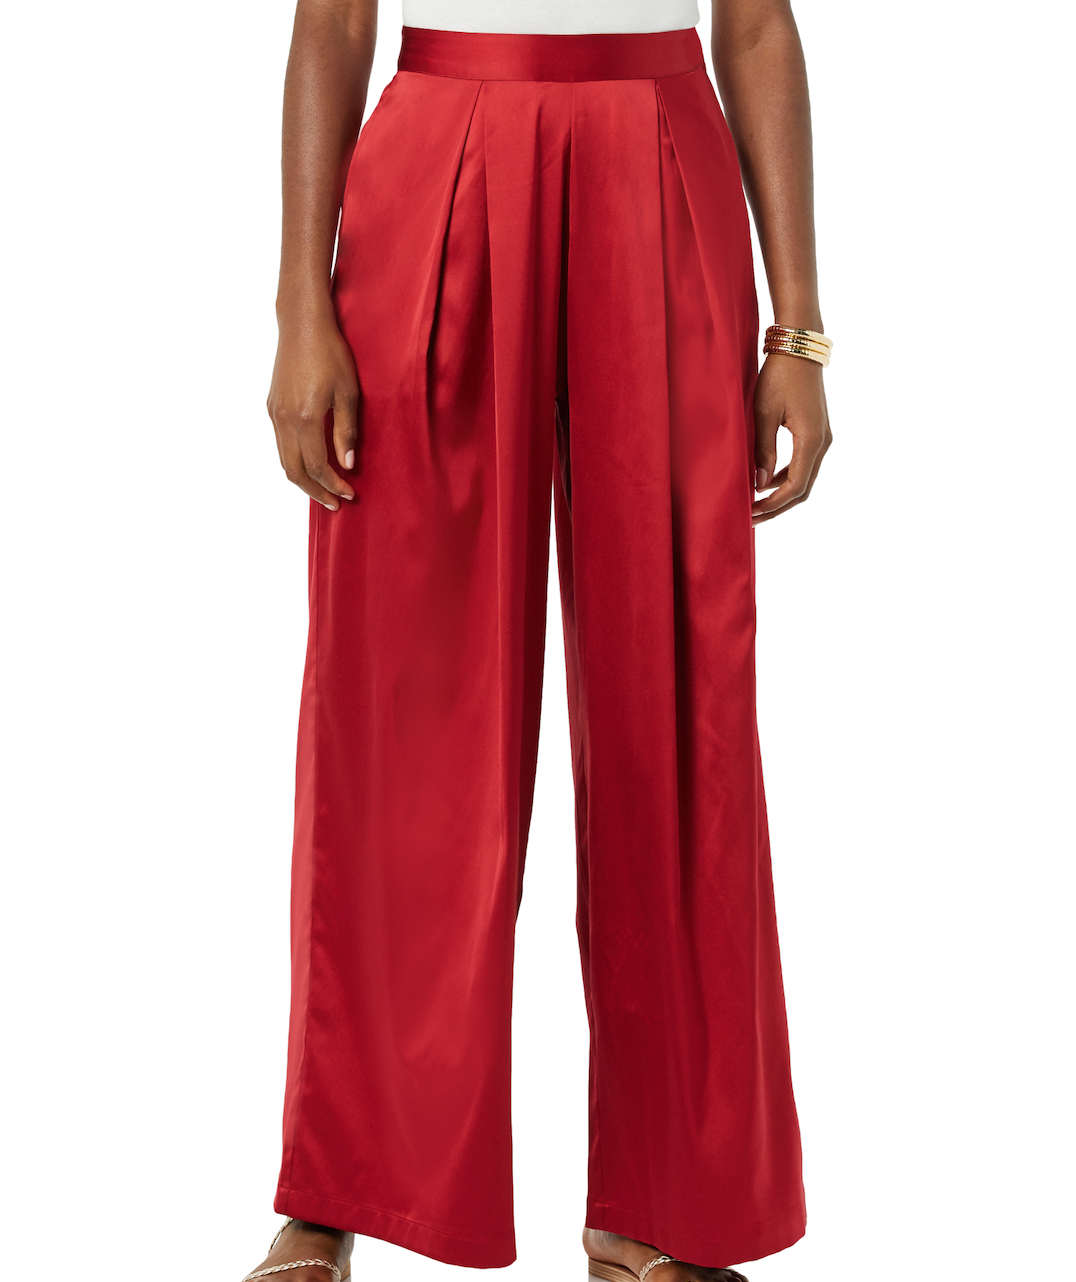 Pleated Wide Leg Pant Inspired by Jeanette's Winning Look